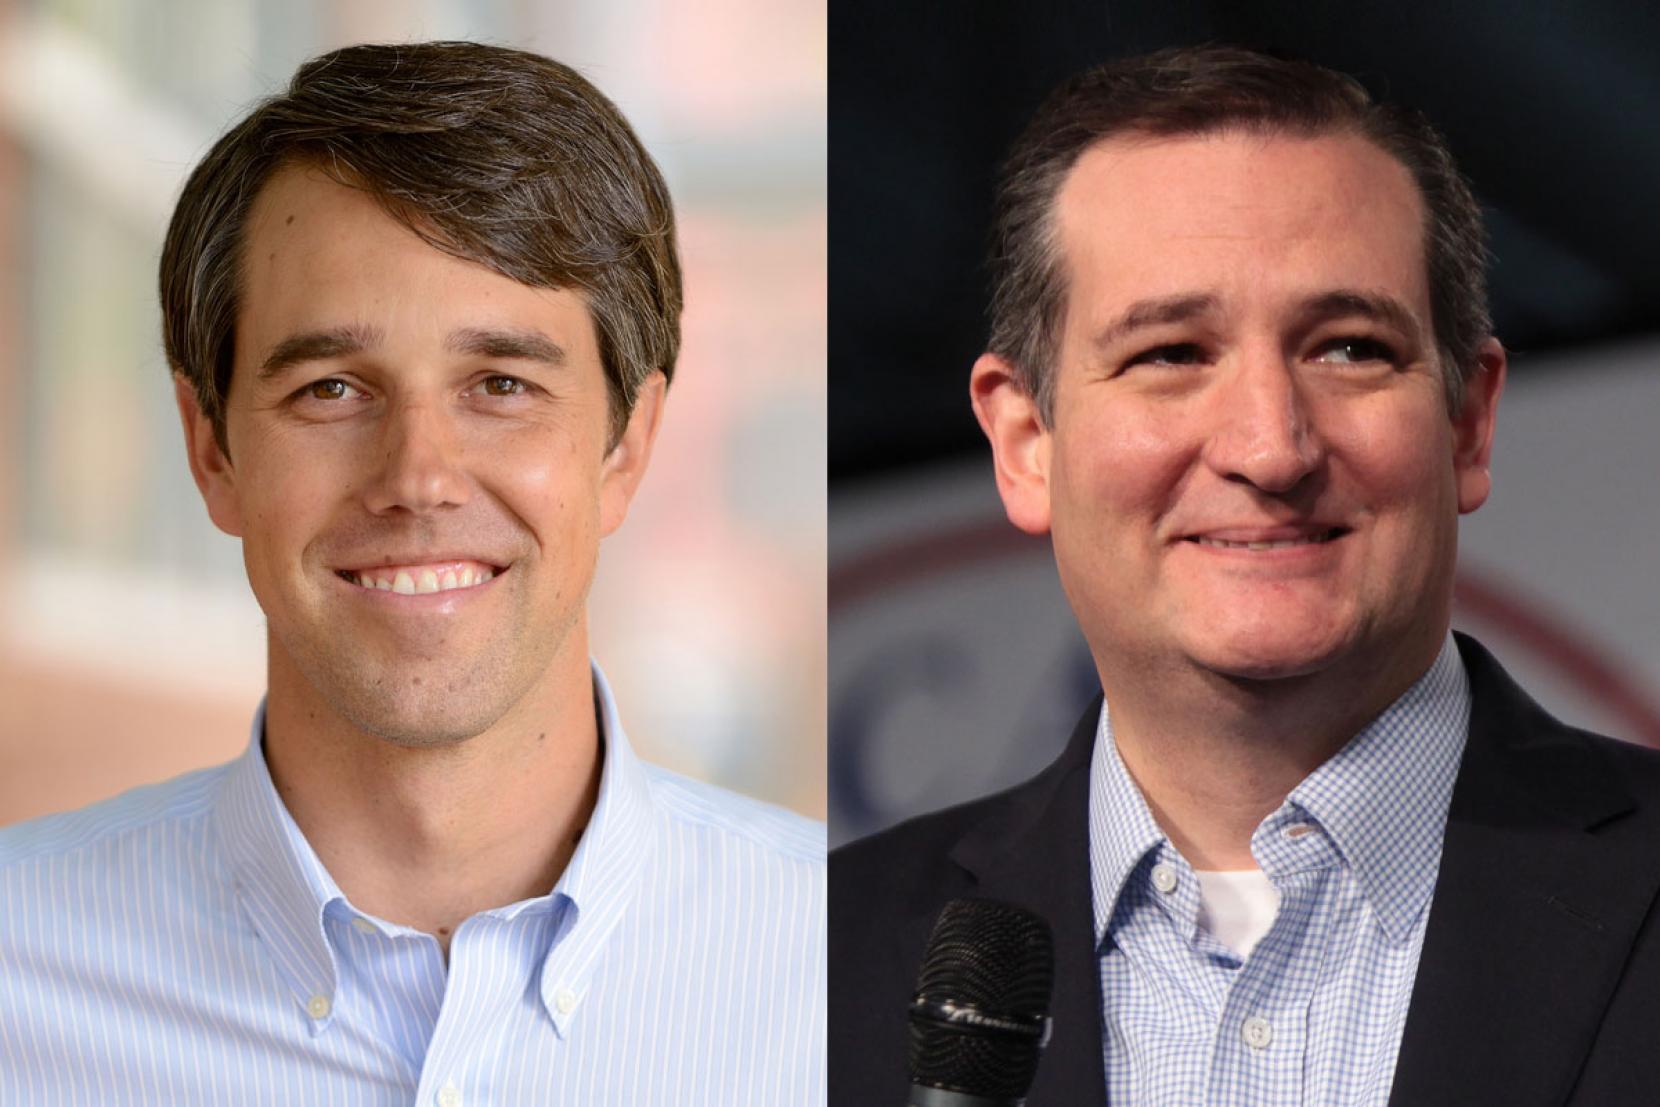 Official campaign photo of Beto O’Rourke (left) and U.S. Sen. 